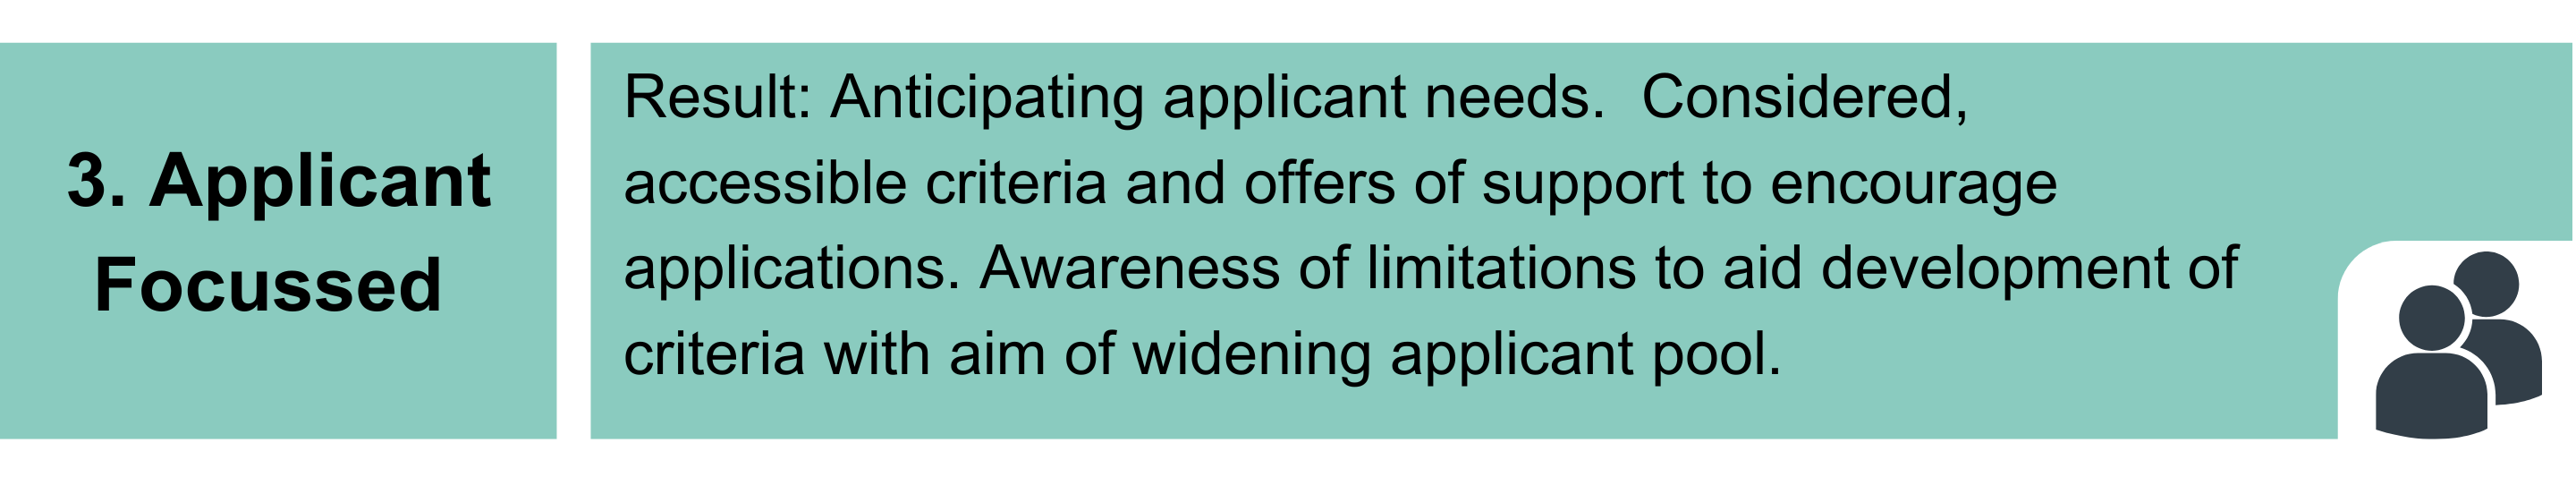 3. Applicant Focussed. Result: Anticipating applicant needs. Considered, accessible criteria and offers of support to encourage applications. Awareness of limitations to aid development of criteria with aim of widening applicant pool.